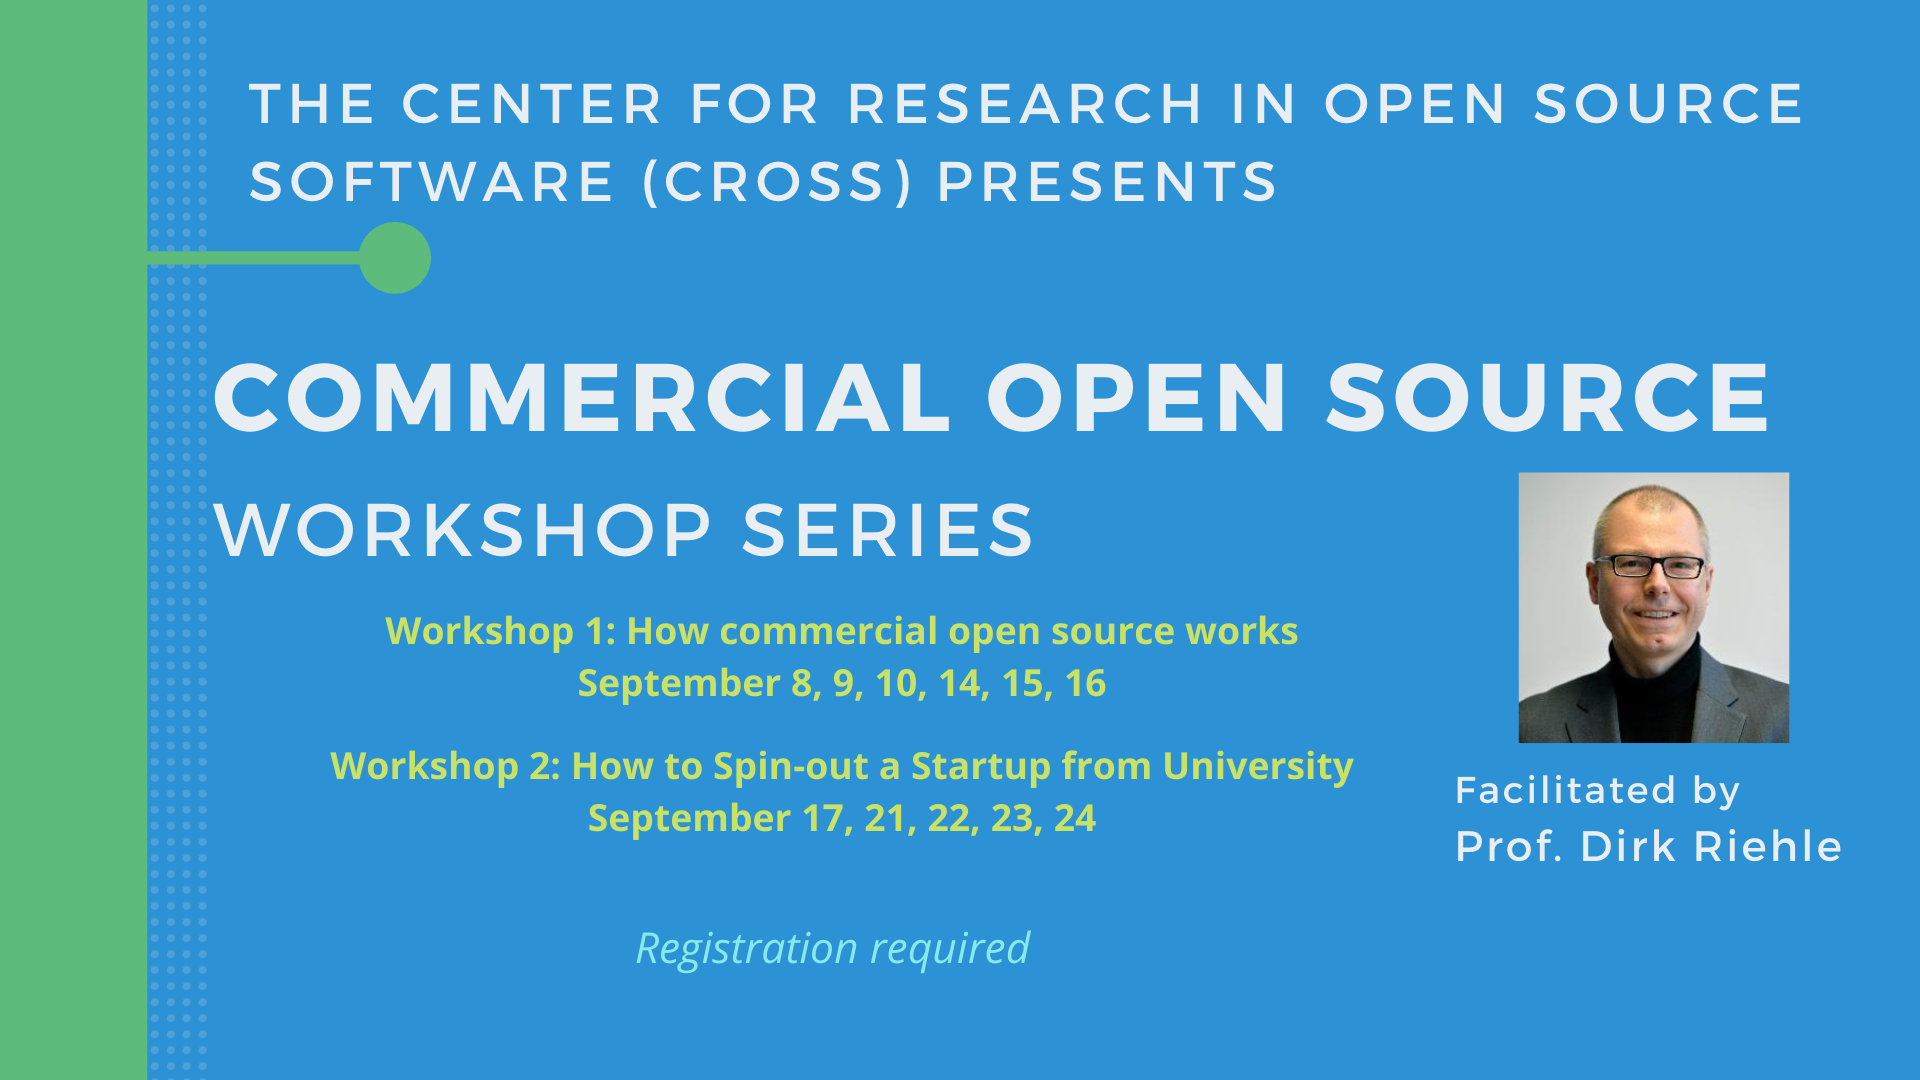 Announcement of CROSS Commercial Open Source workshop with dates and picture of Dirk Riehle